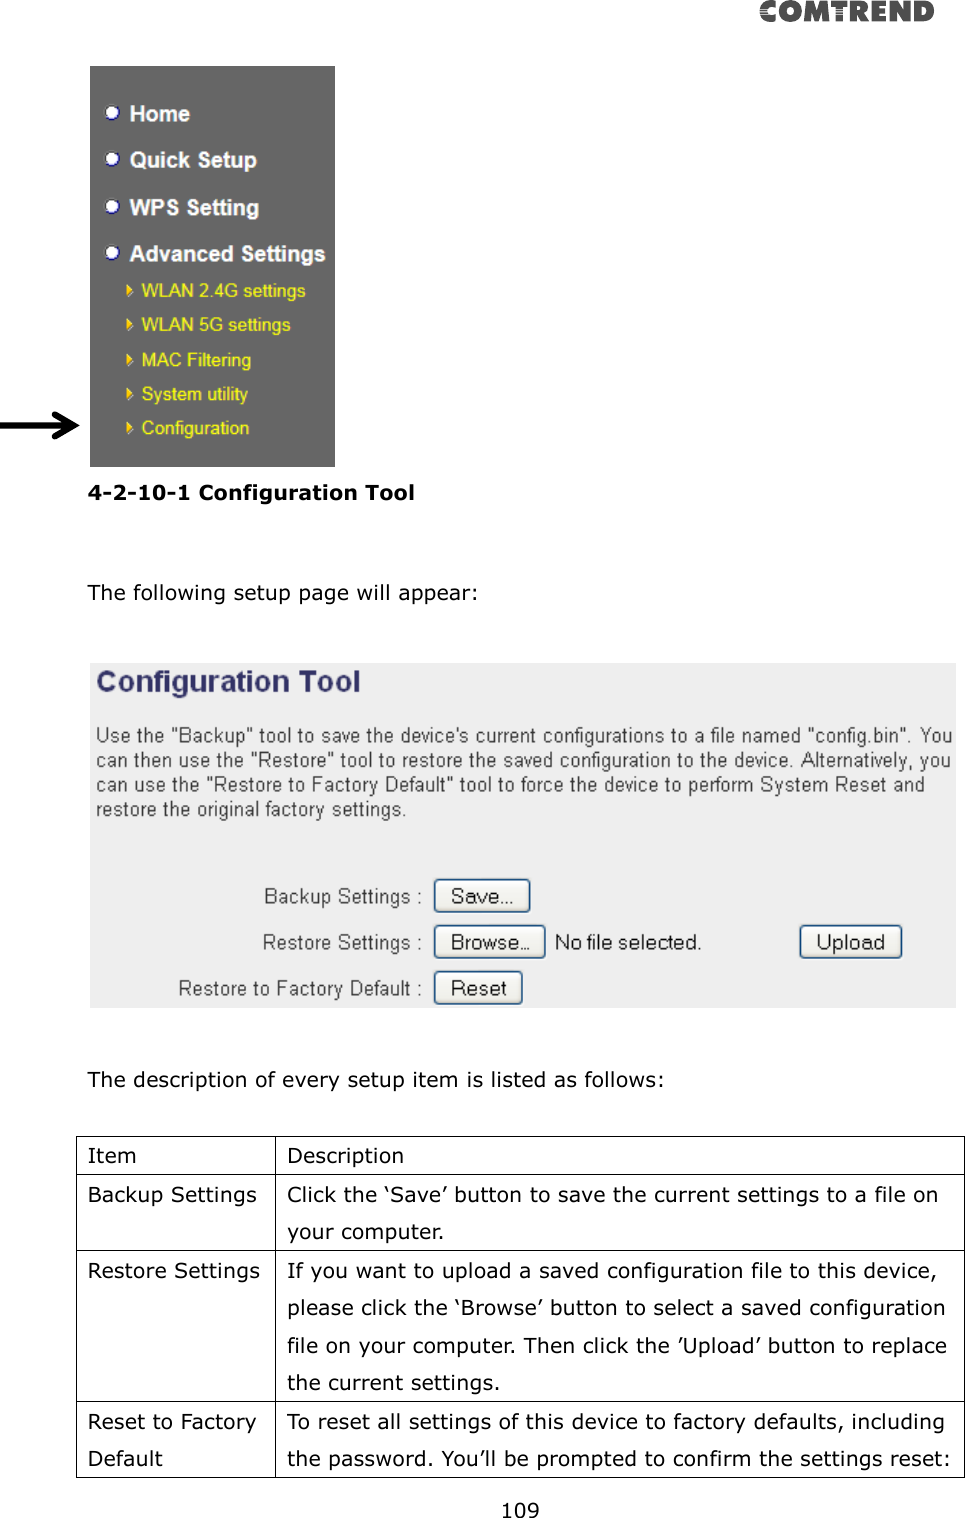       109   4-2-10-1 Configuration Tool  The following setup page will appear:    The description of every setup item is listed as follows:  Item Description Backup Settings Click the ‘Save’ button to save the current settings to a file on your computer.   Restore Settings If you want to upload a saved configuration file to this device, please click the ‘Browse’ button to select a saved configuration file on your computer. Then click the ’Upload’ button to replace the current settings. Reset to Factory Default To reset all settings of this device to factory defaults, including the password. You’ll be prompted to confirm the settings reset: 